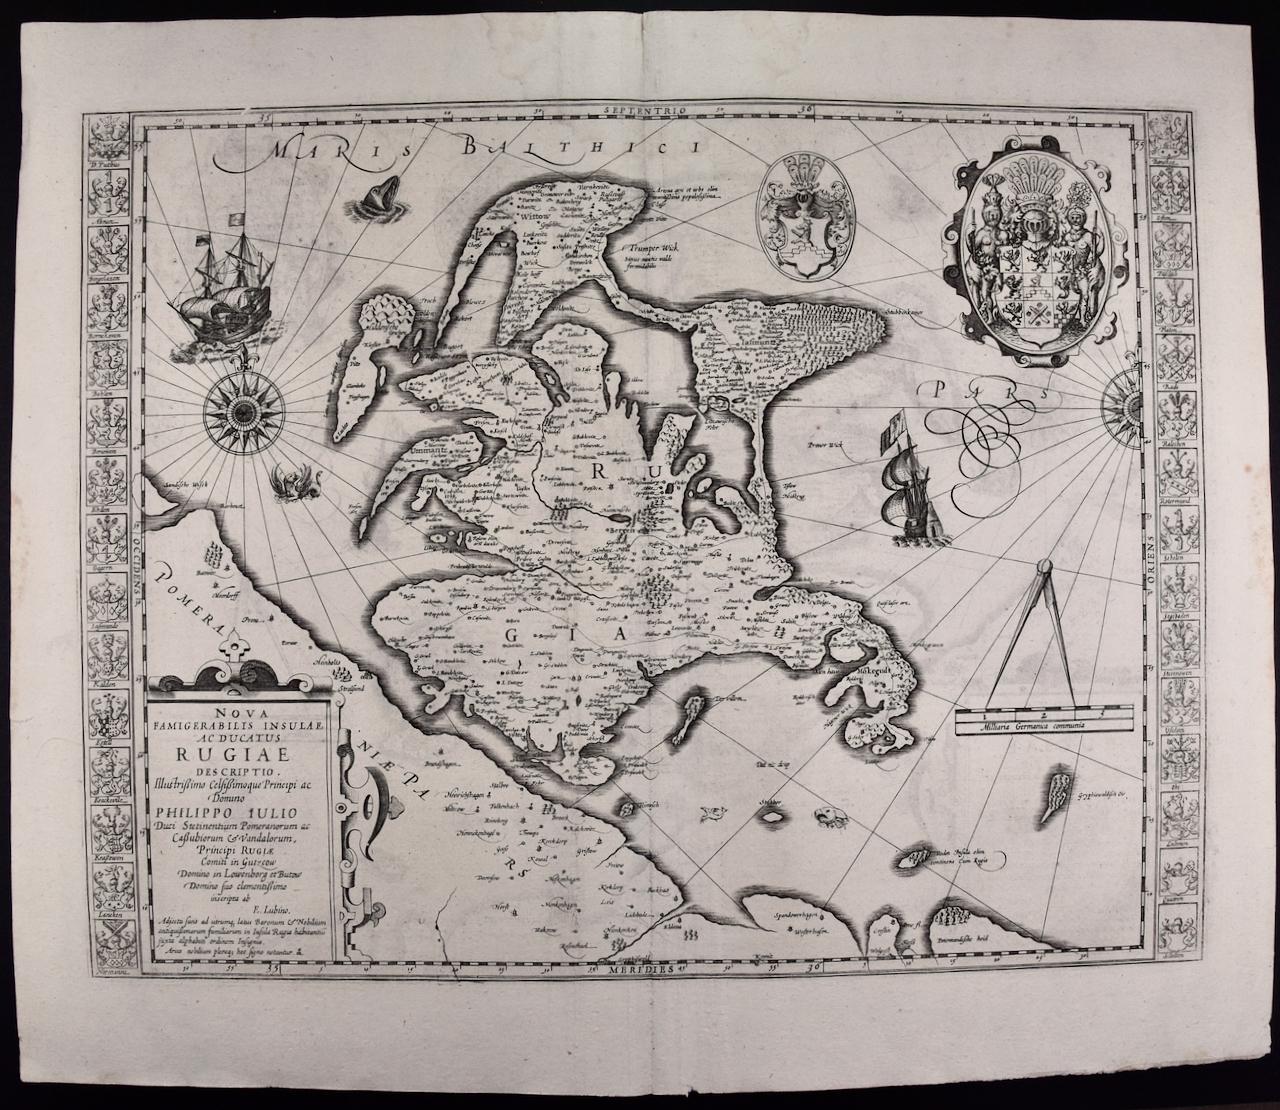 Gerard Mercator Print - Rugen Island, Germany: An Early 17th Century Map by Mercator and Hondius